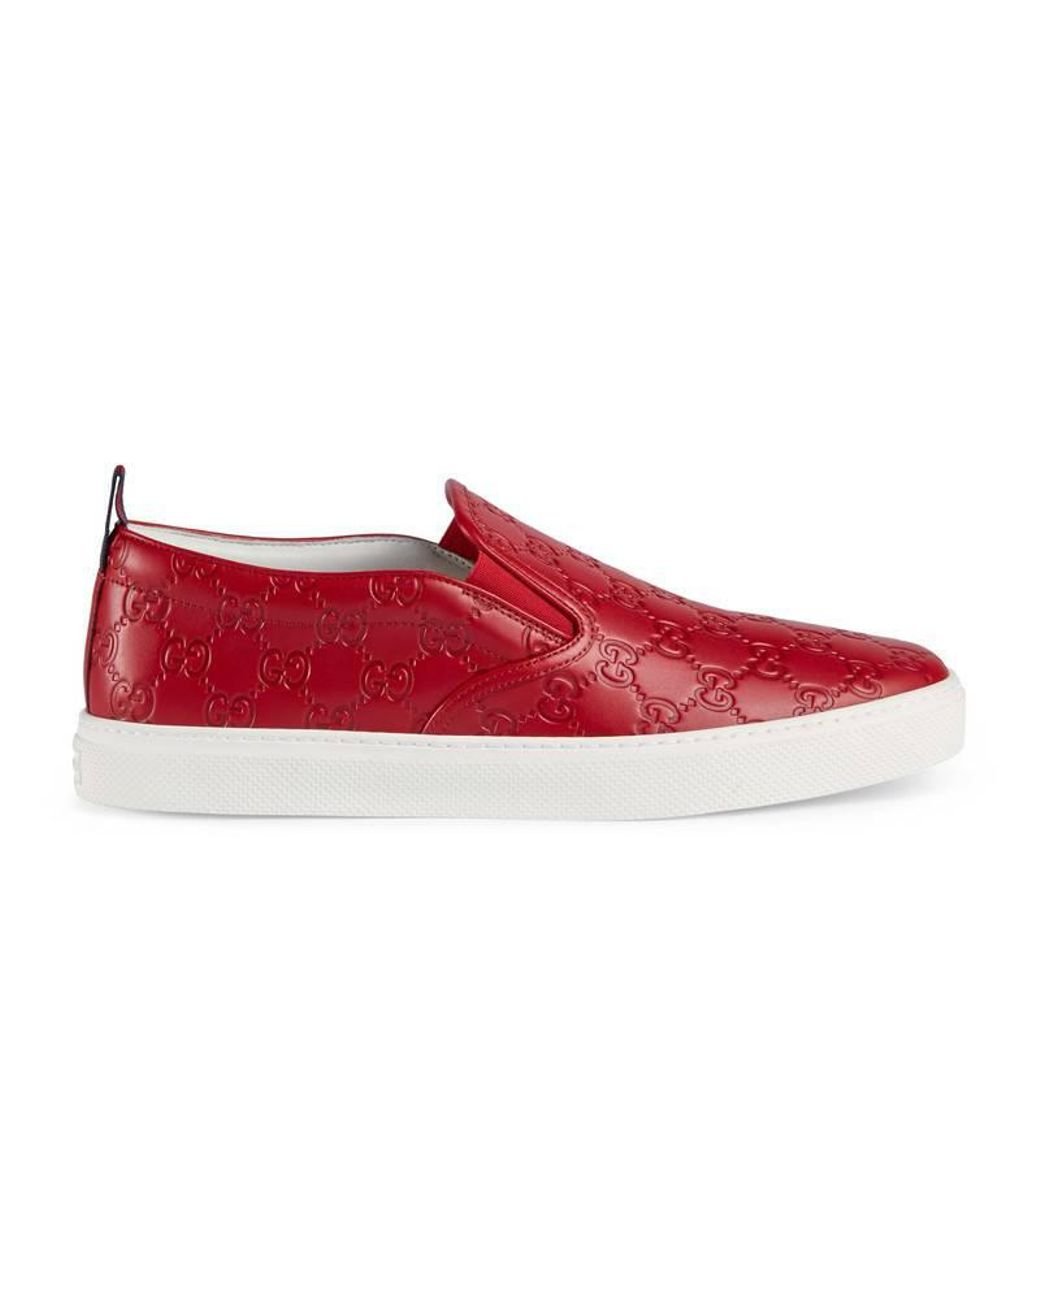 Introduce Substantially study Gucci Leather Signature Slip-on Sneaker in Red | Lyst